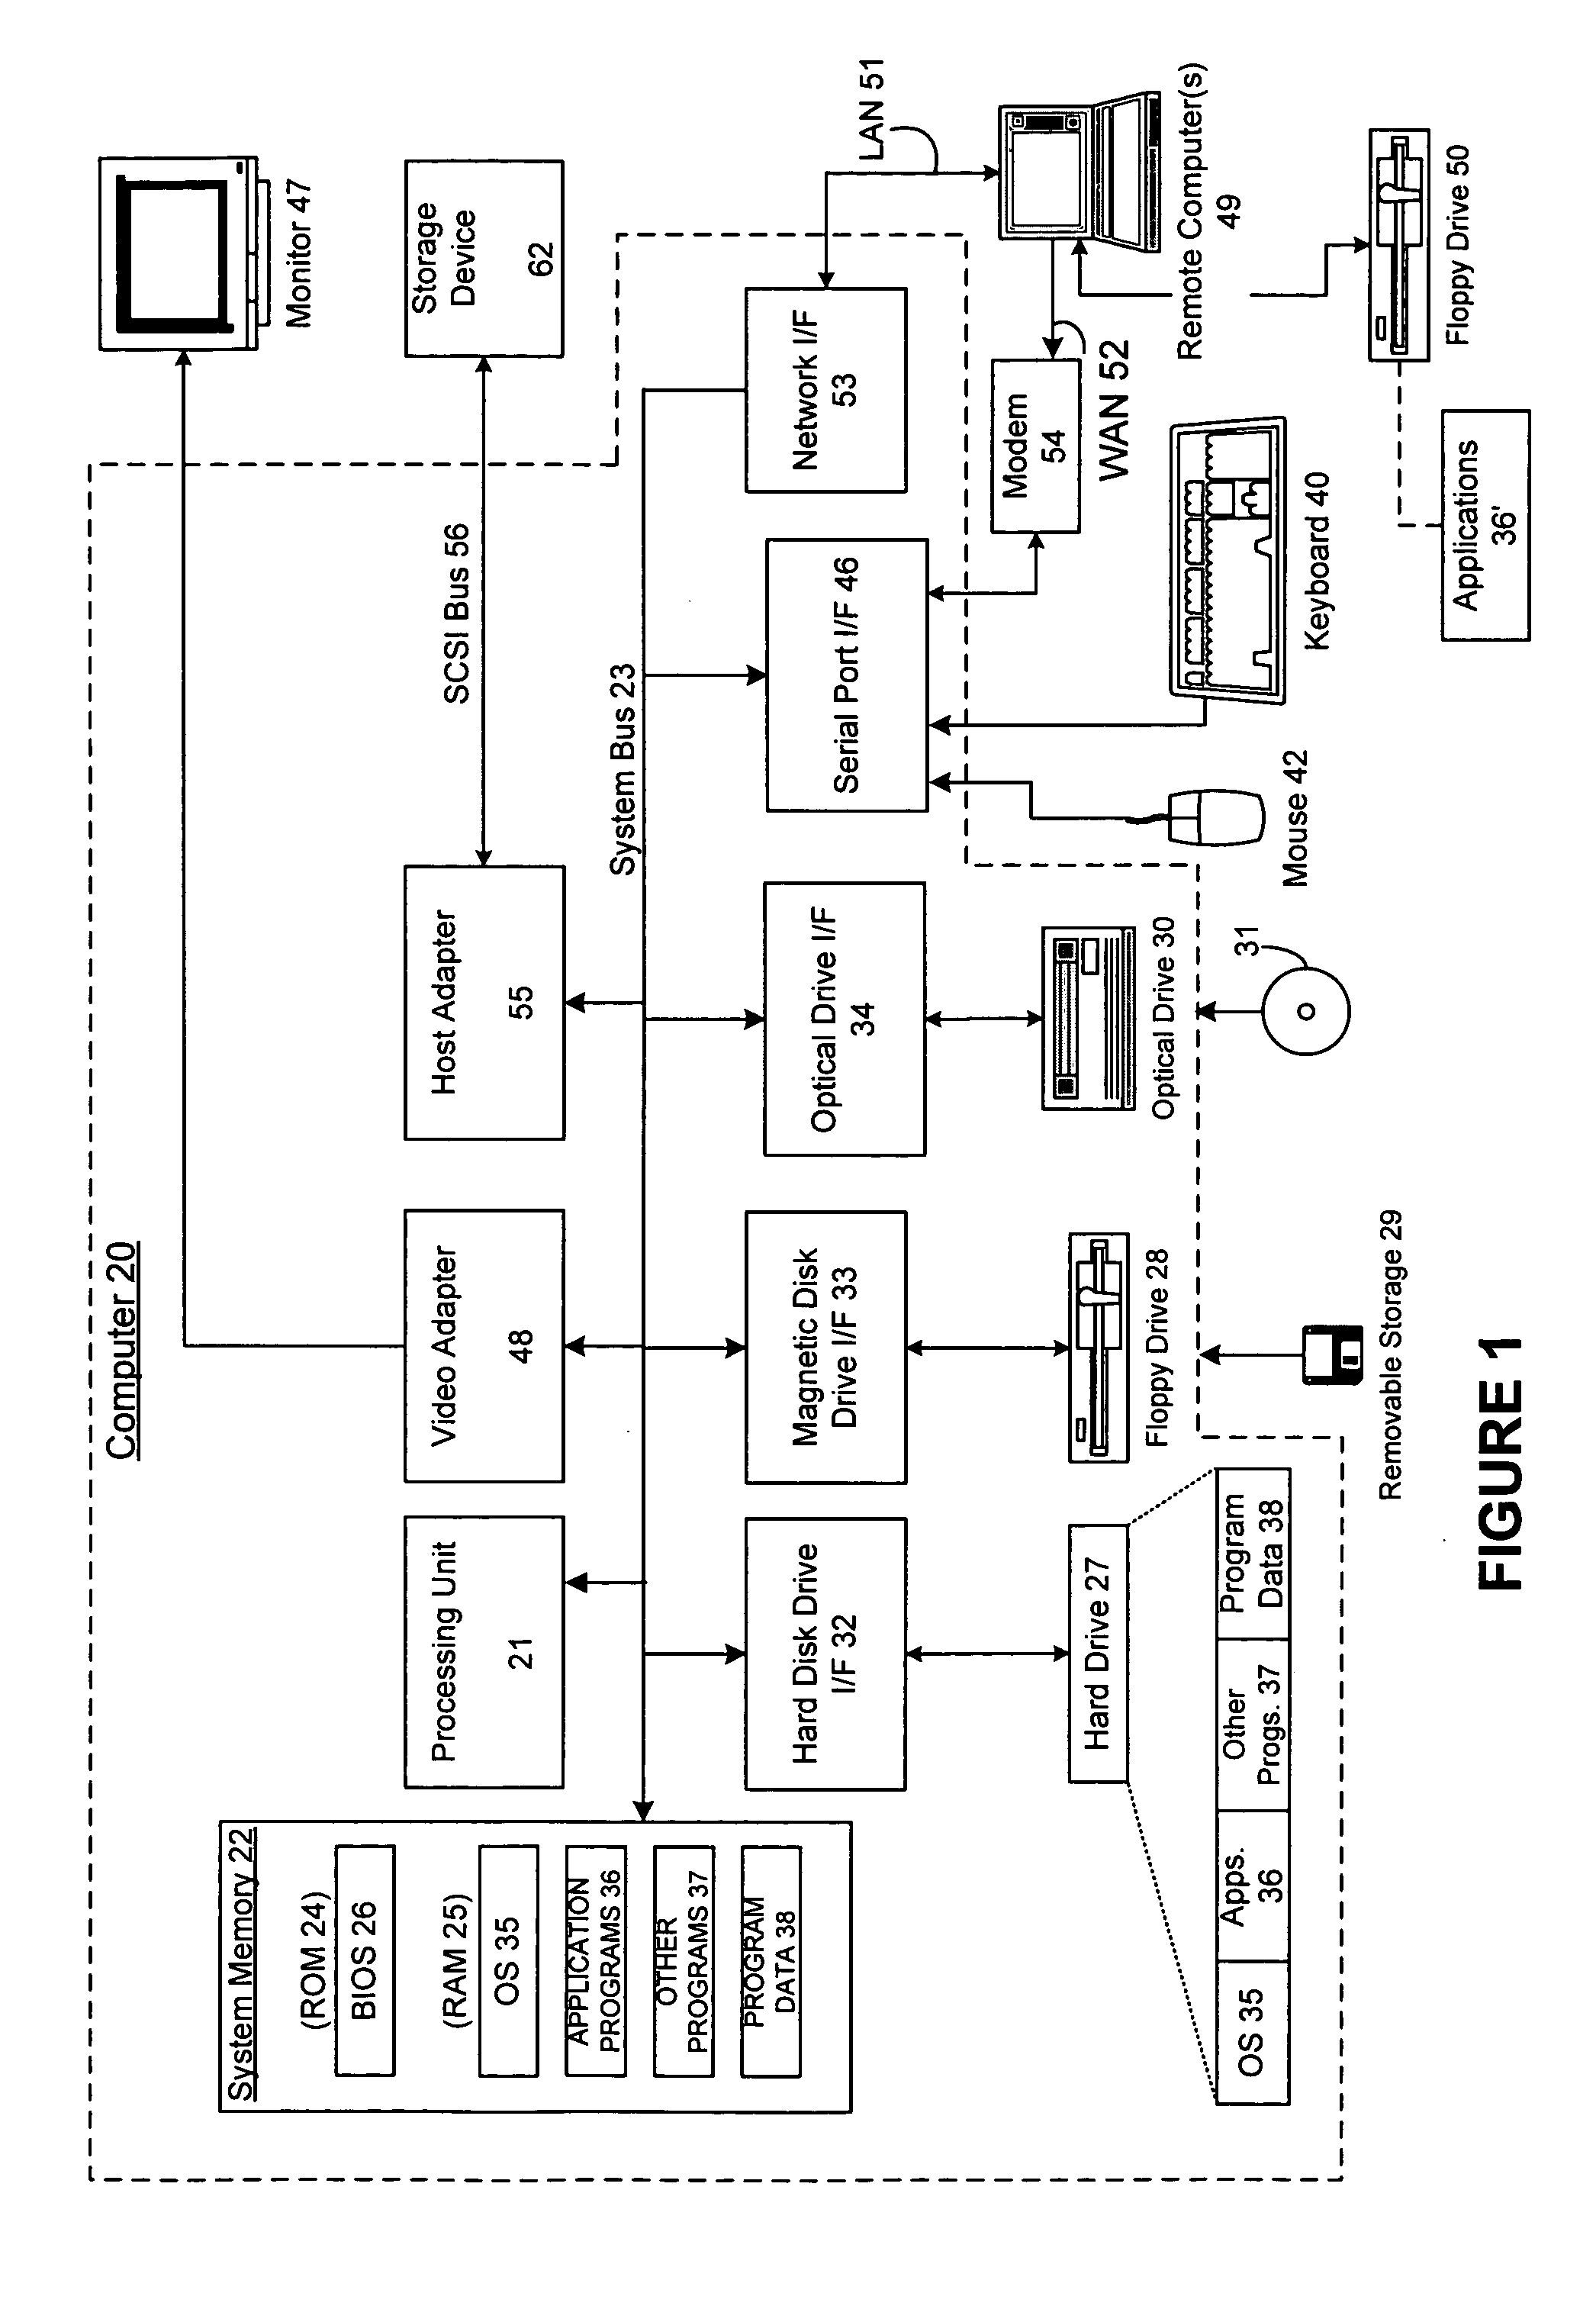 Systems and methods for distributing a workplan for data flow execution based on an arbitrary graph describing the desired data flow